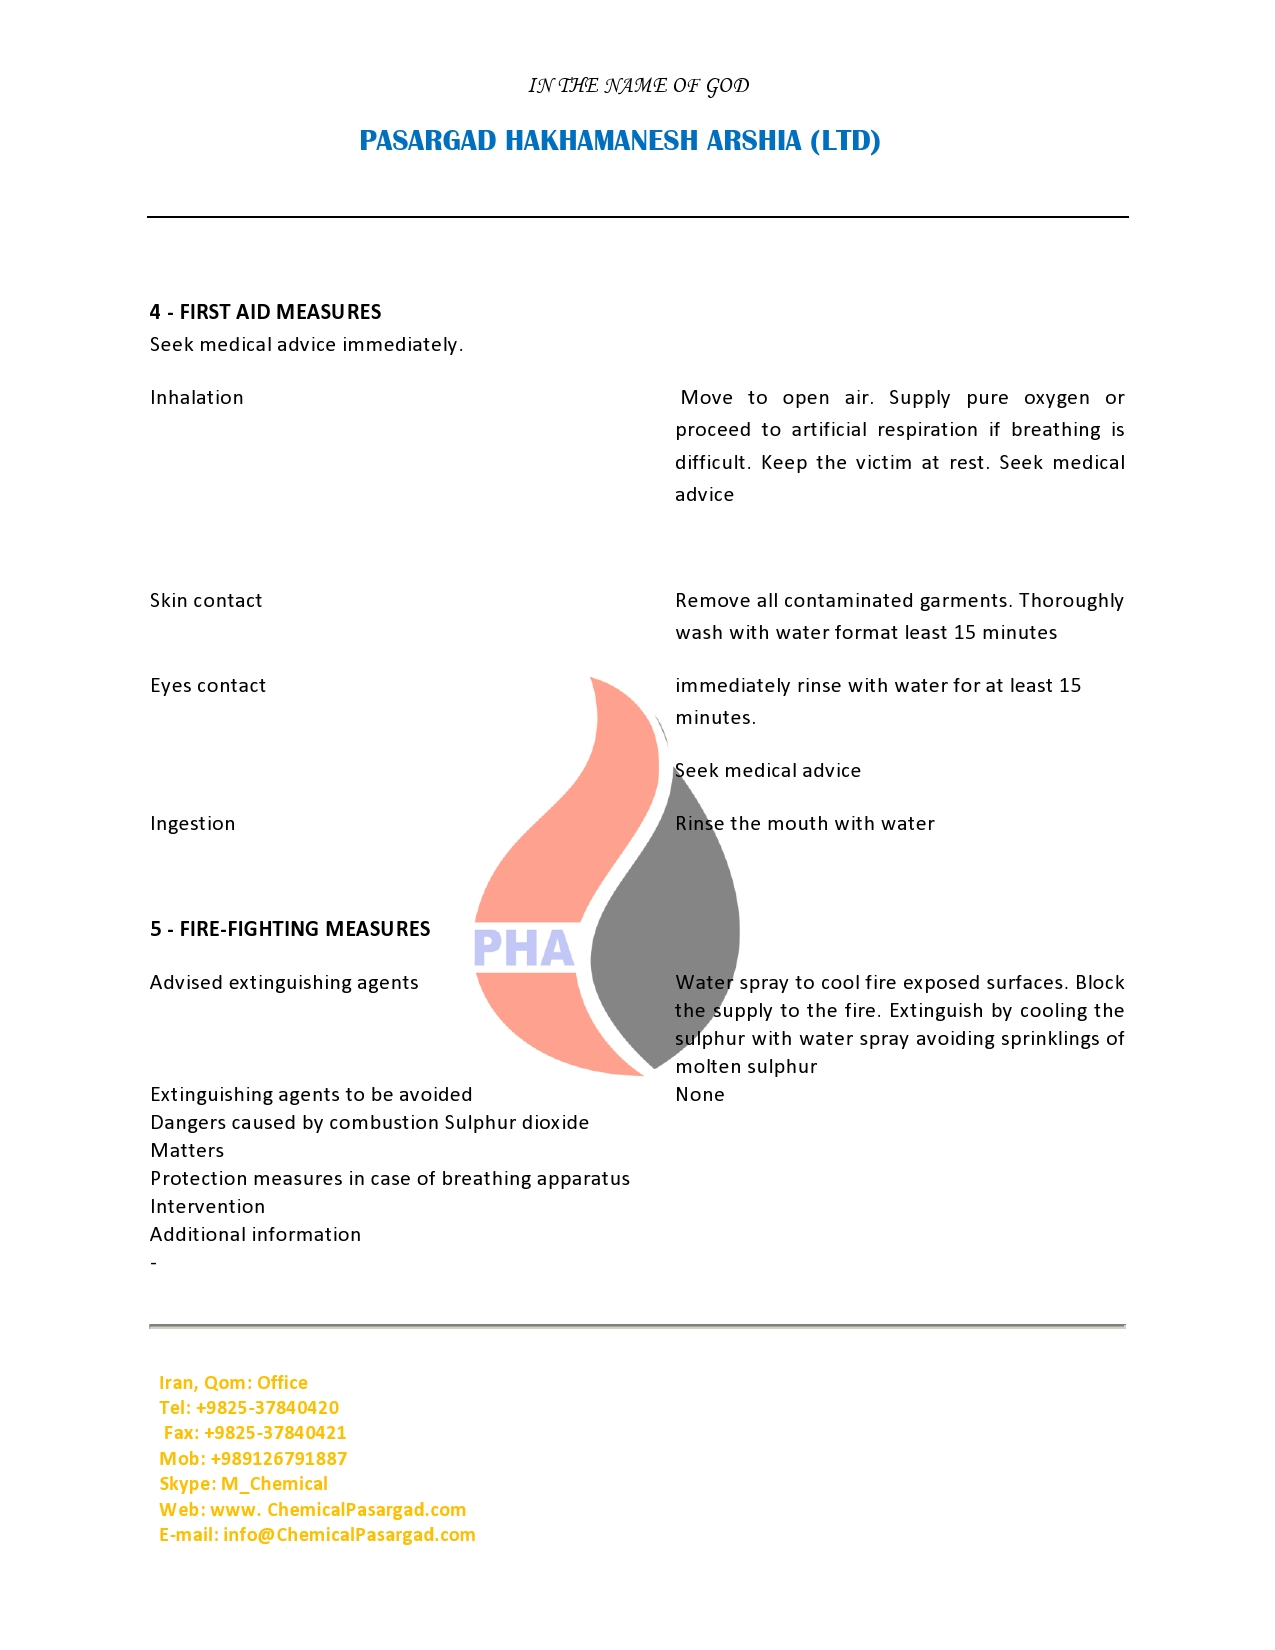 MATERIAL SAFETY DATA SHEET HIGH PURITY SULFUR